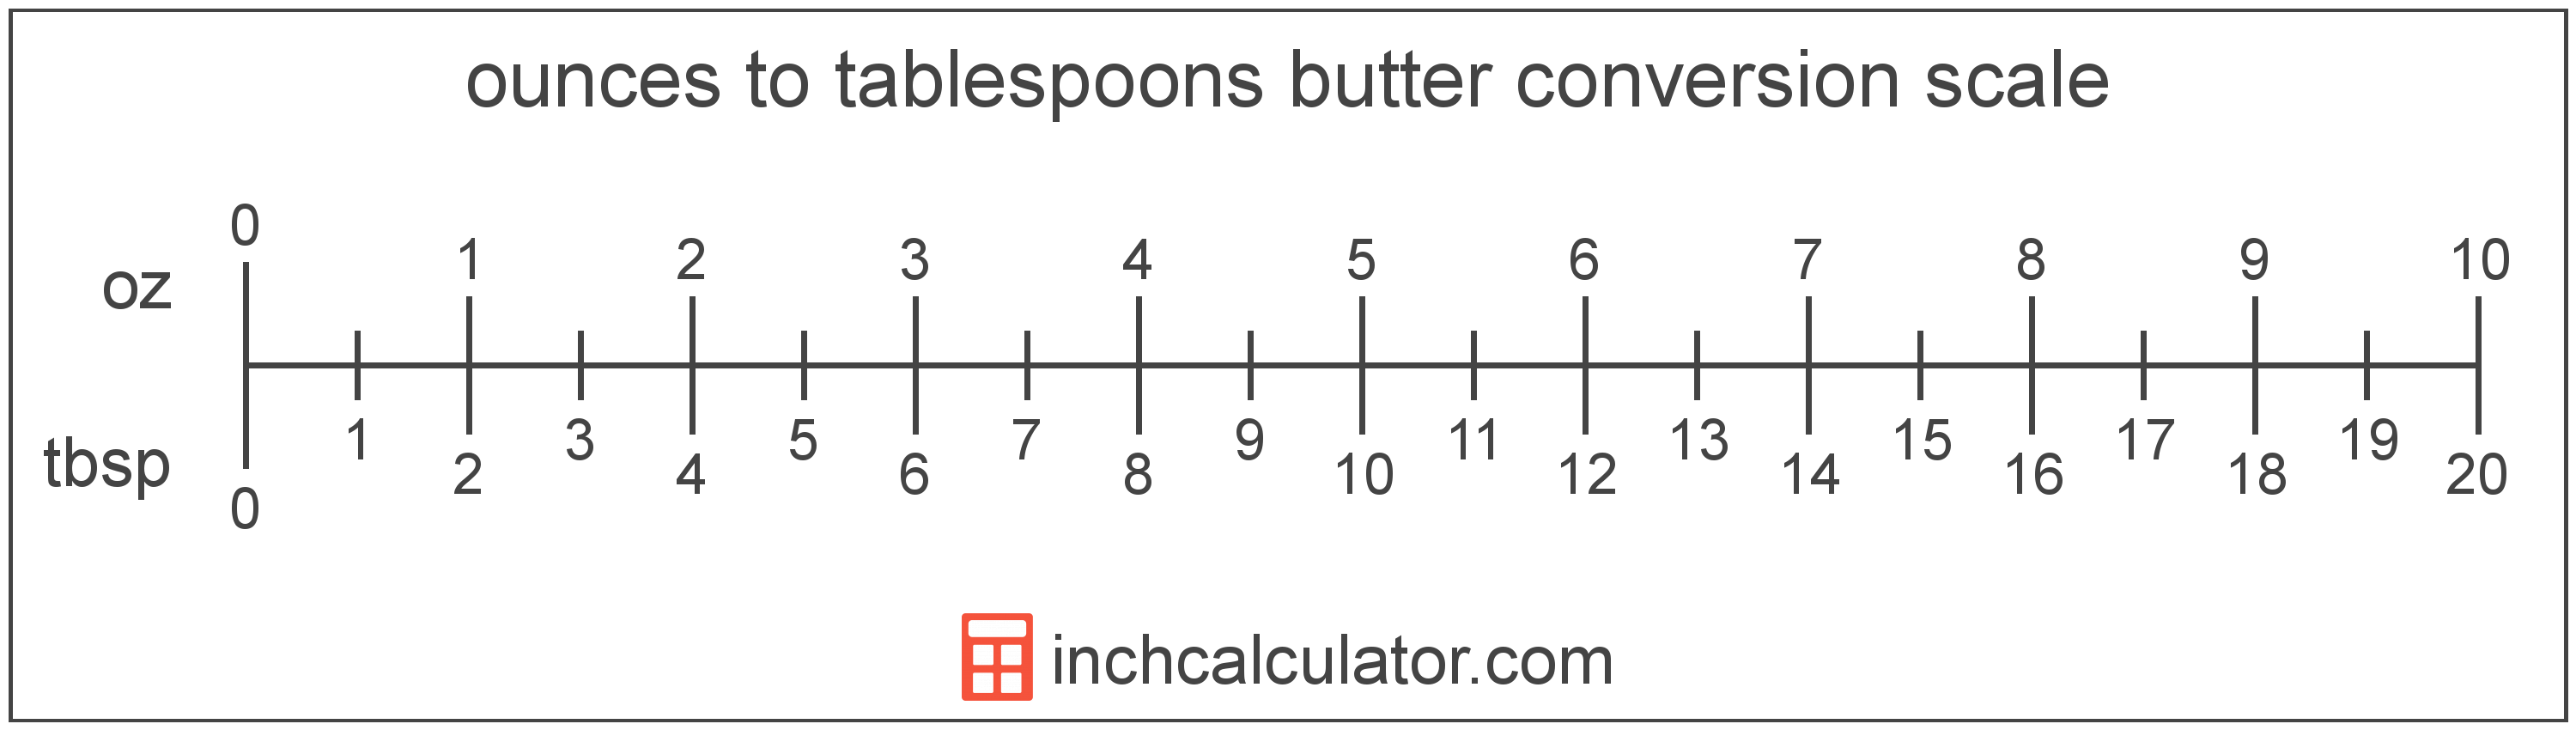 conversion scale showing tablespoons and equivalent ounces butter values